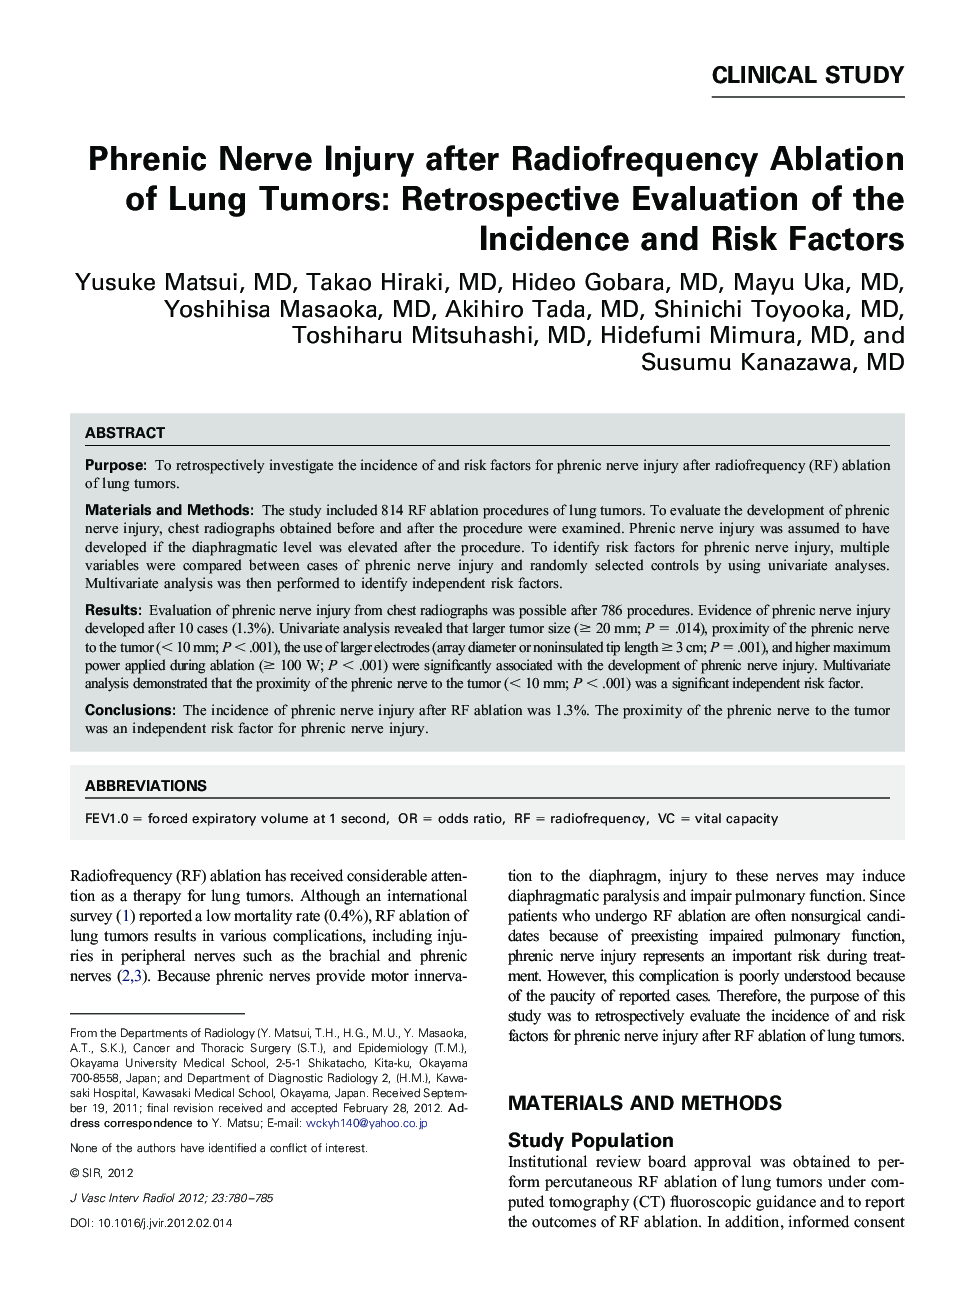 Phrenic Nerve Injury after Radiofrequency Ablation of Lung Tumors: Retrospective Evaluation of the Incidence and Risk Factors